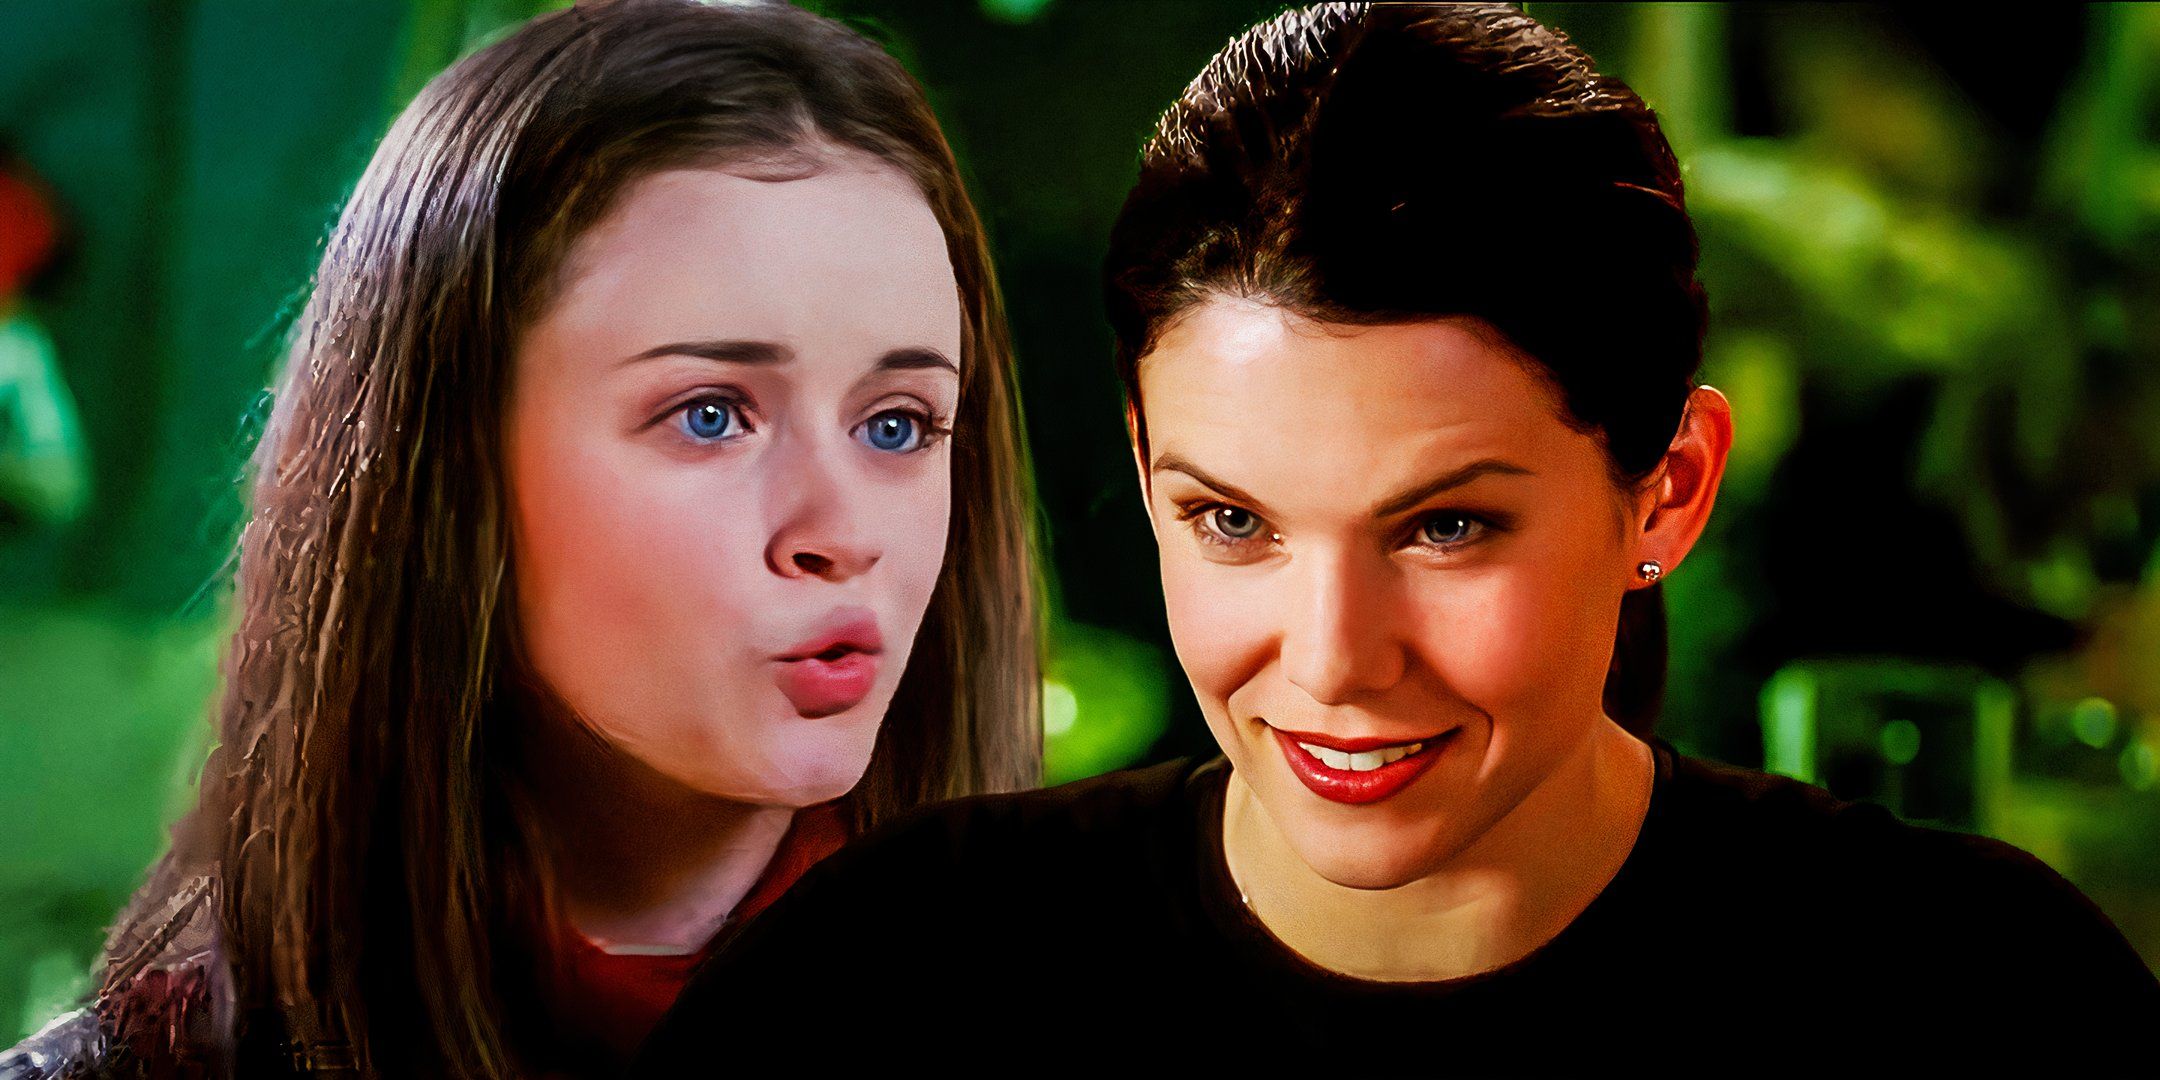 Lorelai-Gilmore-and-Rory-Gilmore-from-Gilmore-Girls